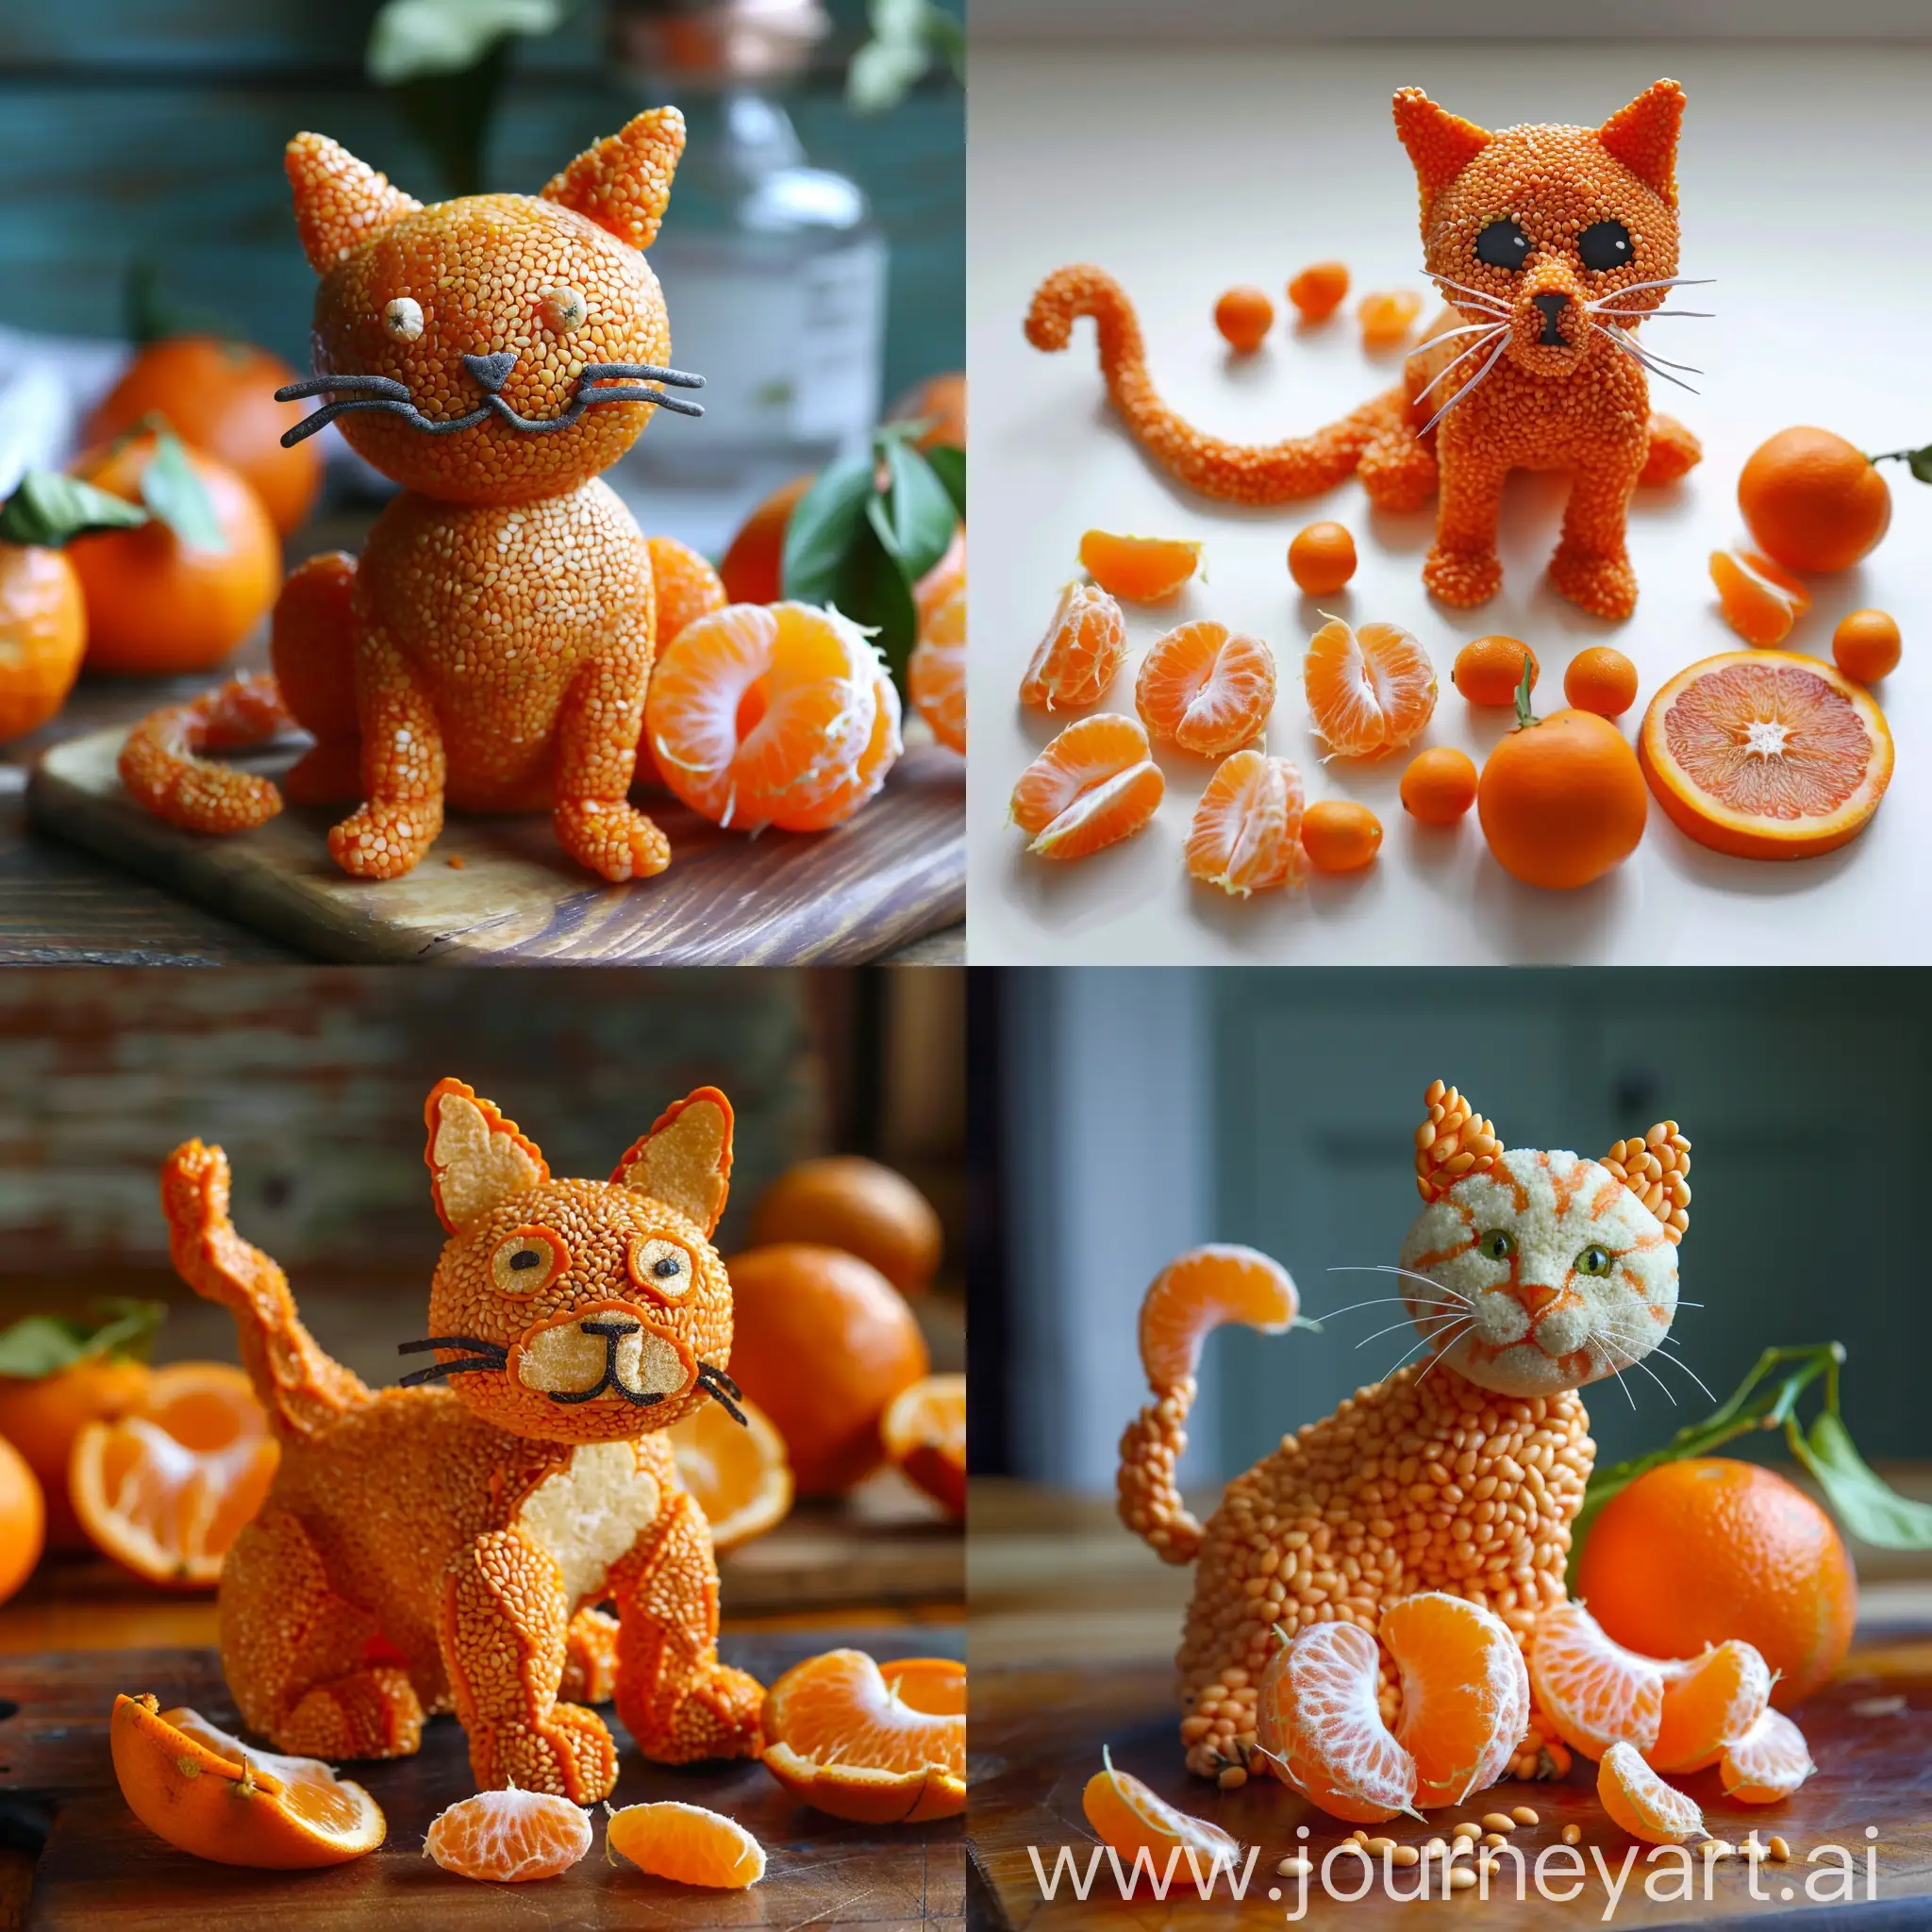 Tangerine-Seed-Cat-Sculpture-Whimsical-Artwork-Made-with-17604-Seeds